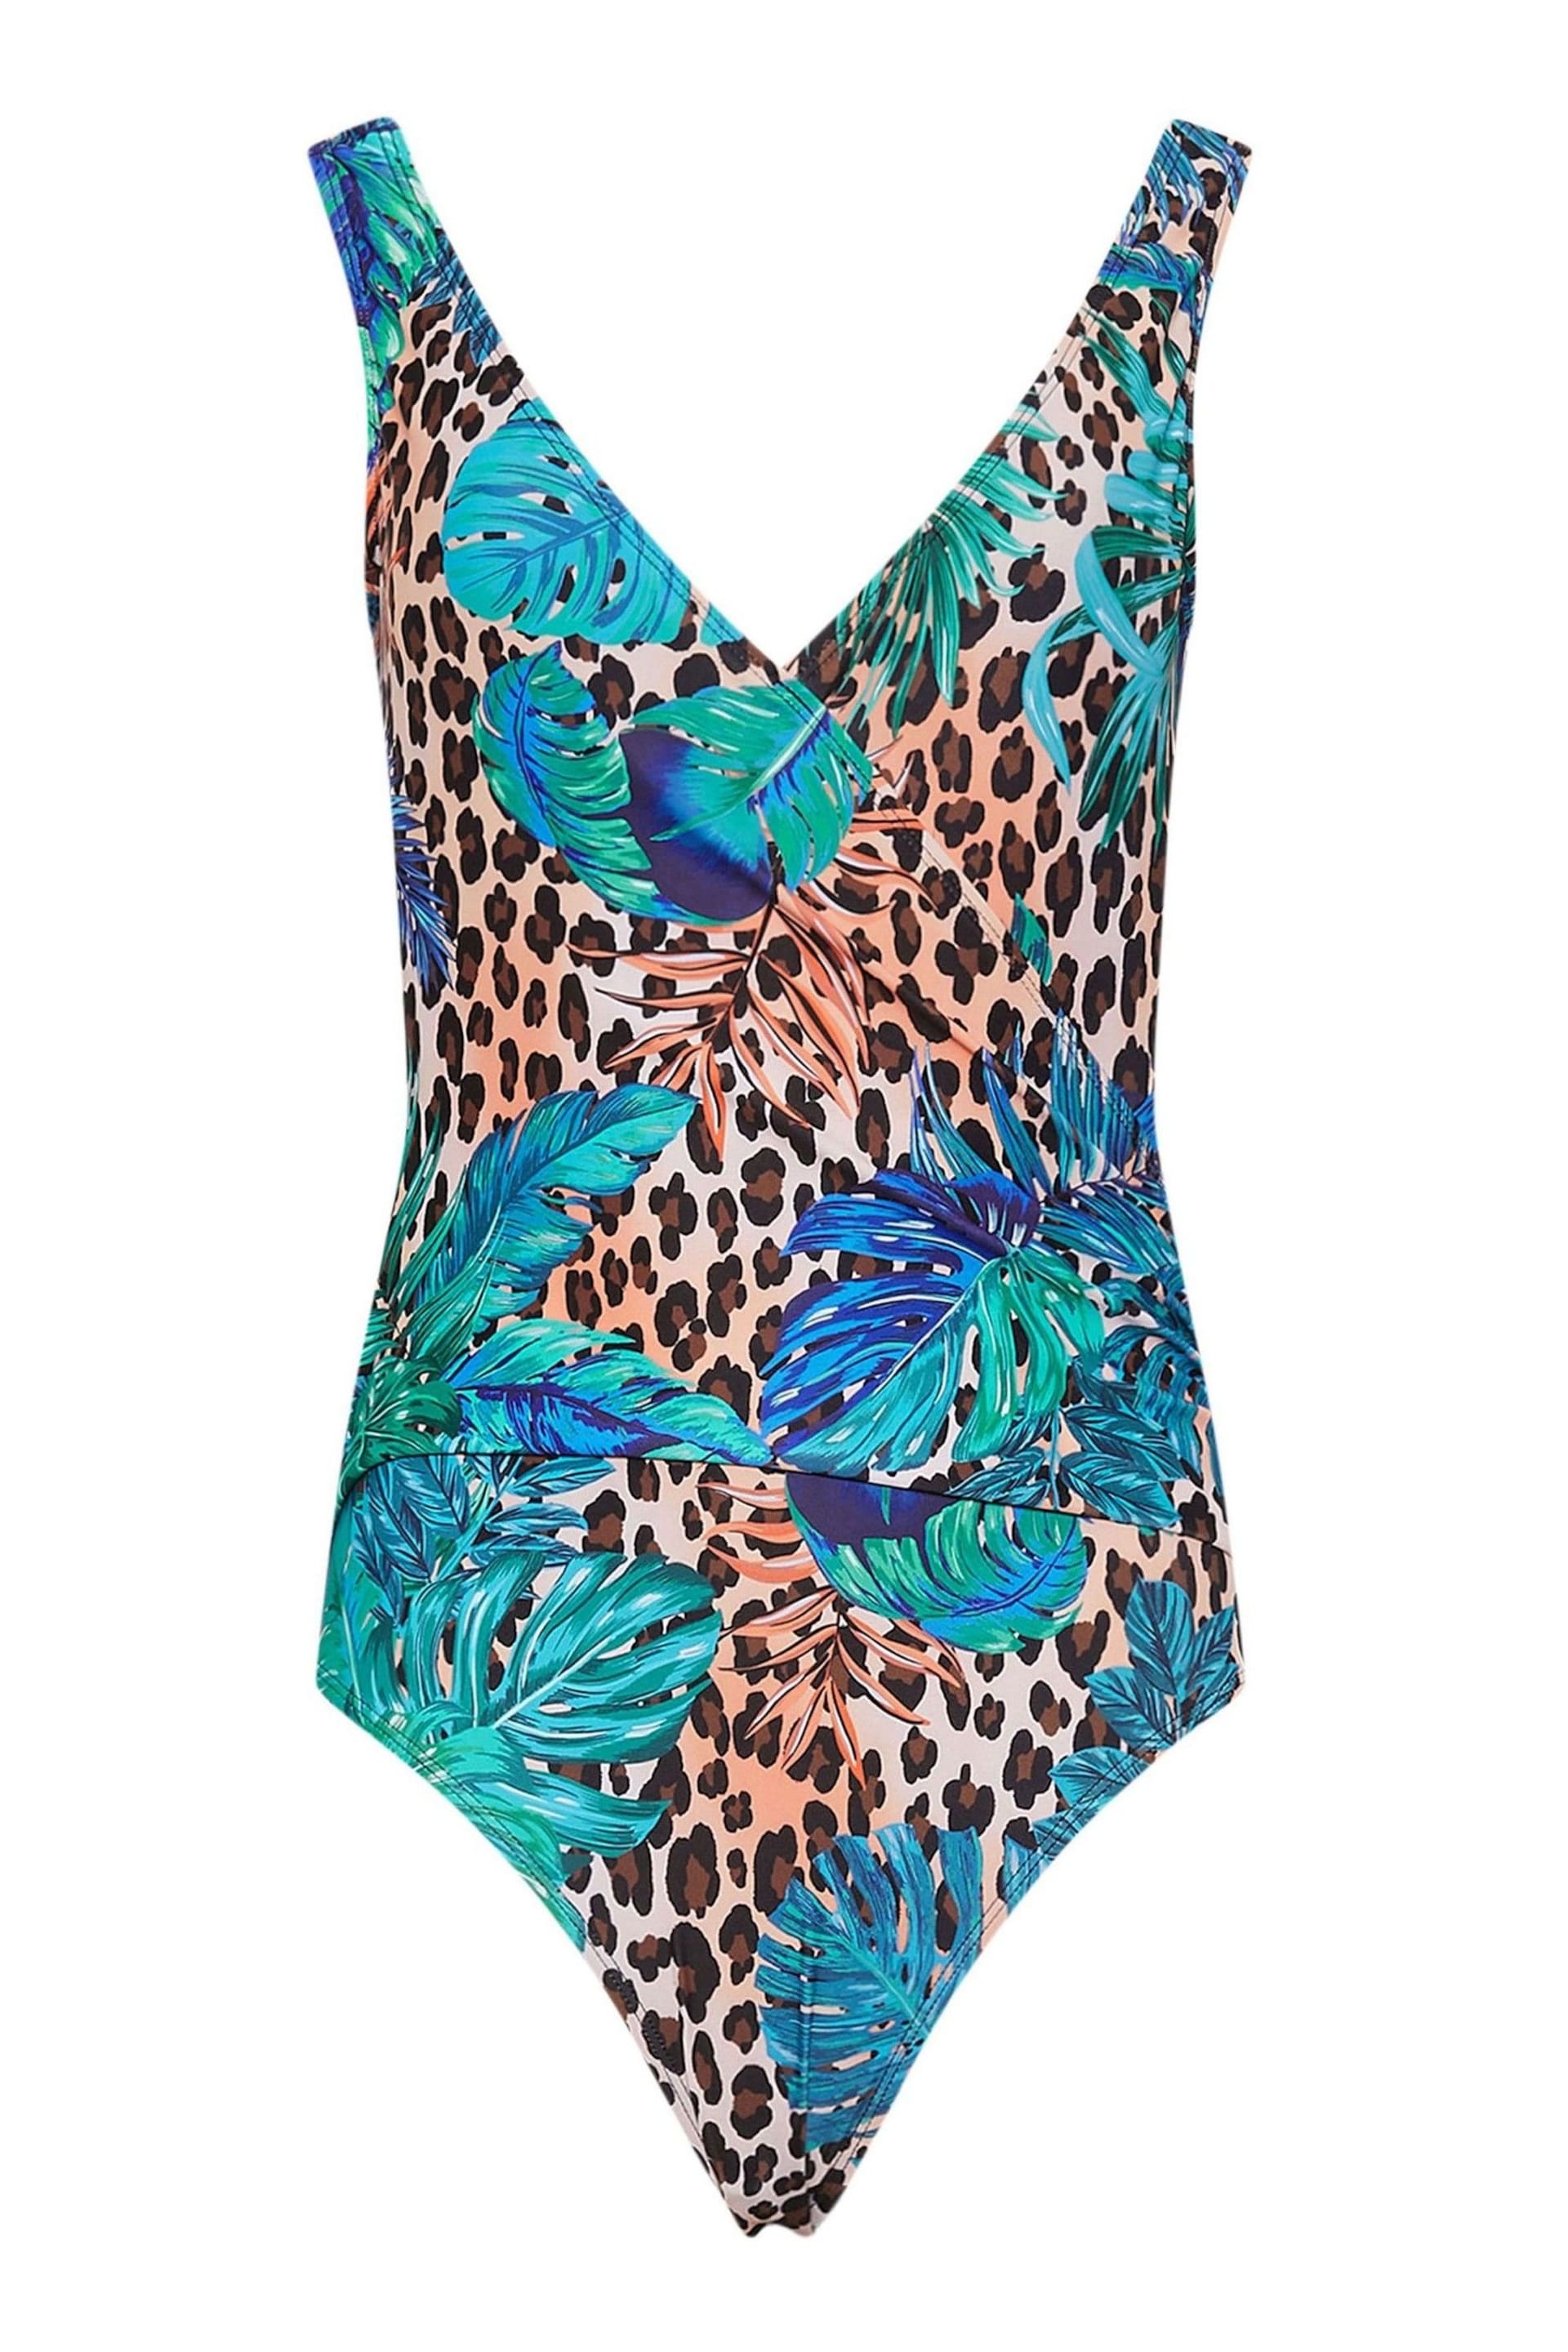 Long Tall Sally Blue&Brown Tropical Leopard Print Wrap Swimsuit - Image 6 of 6